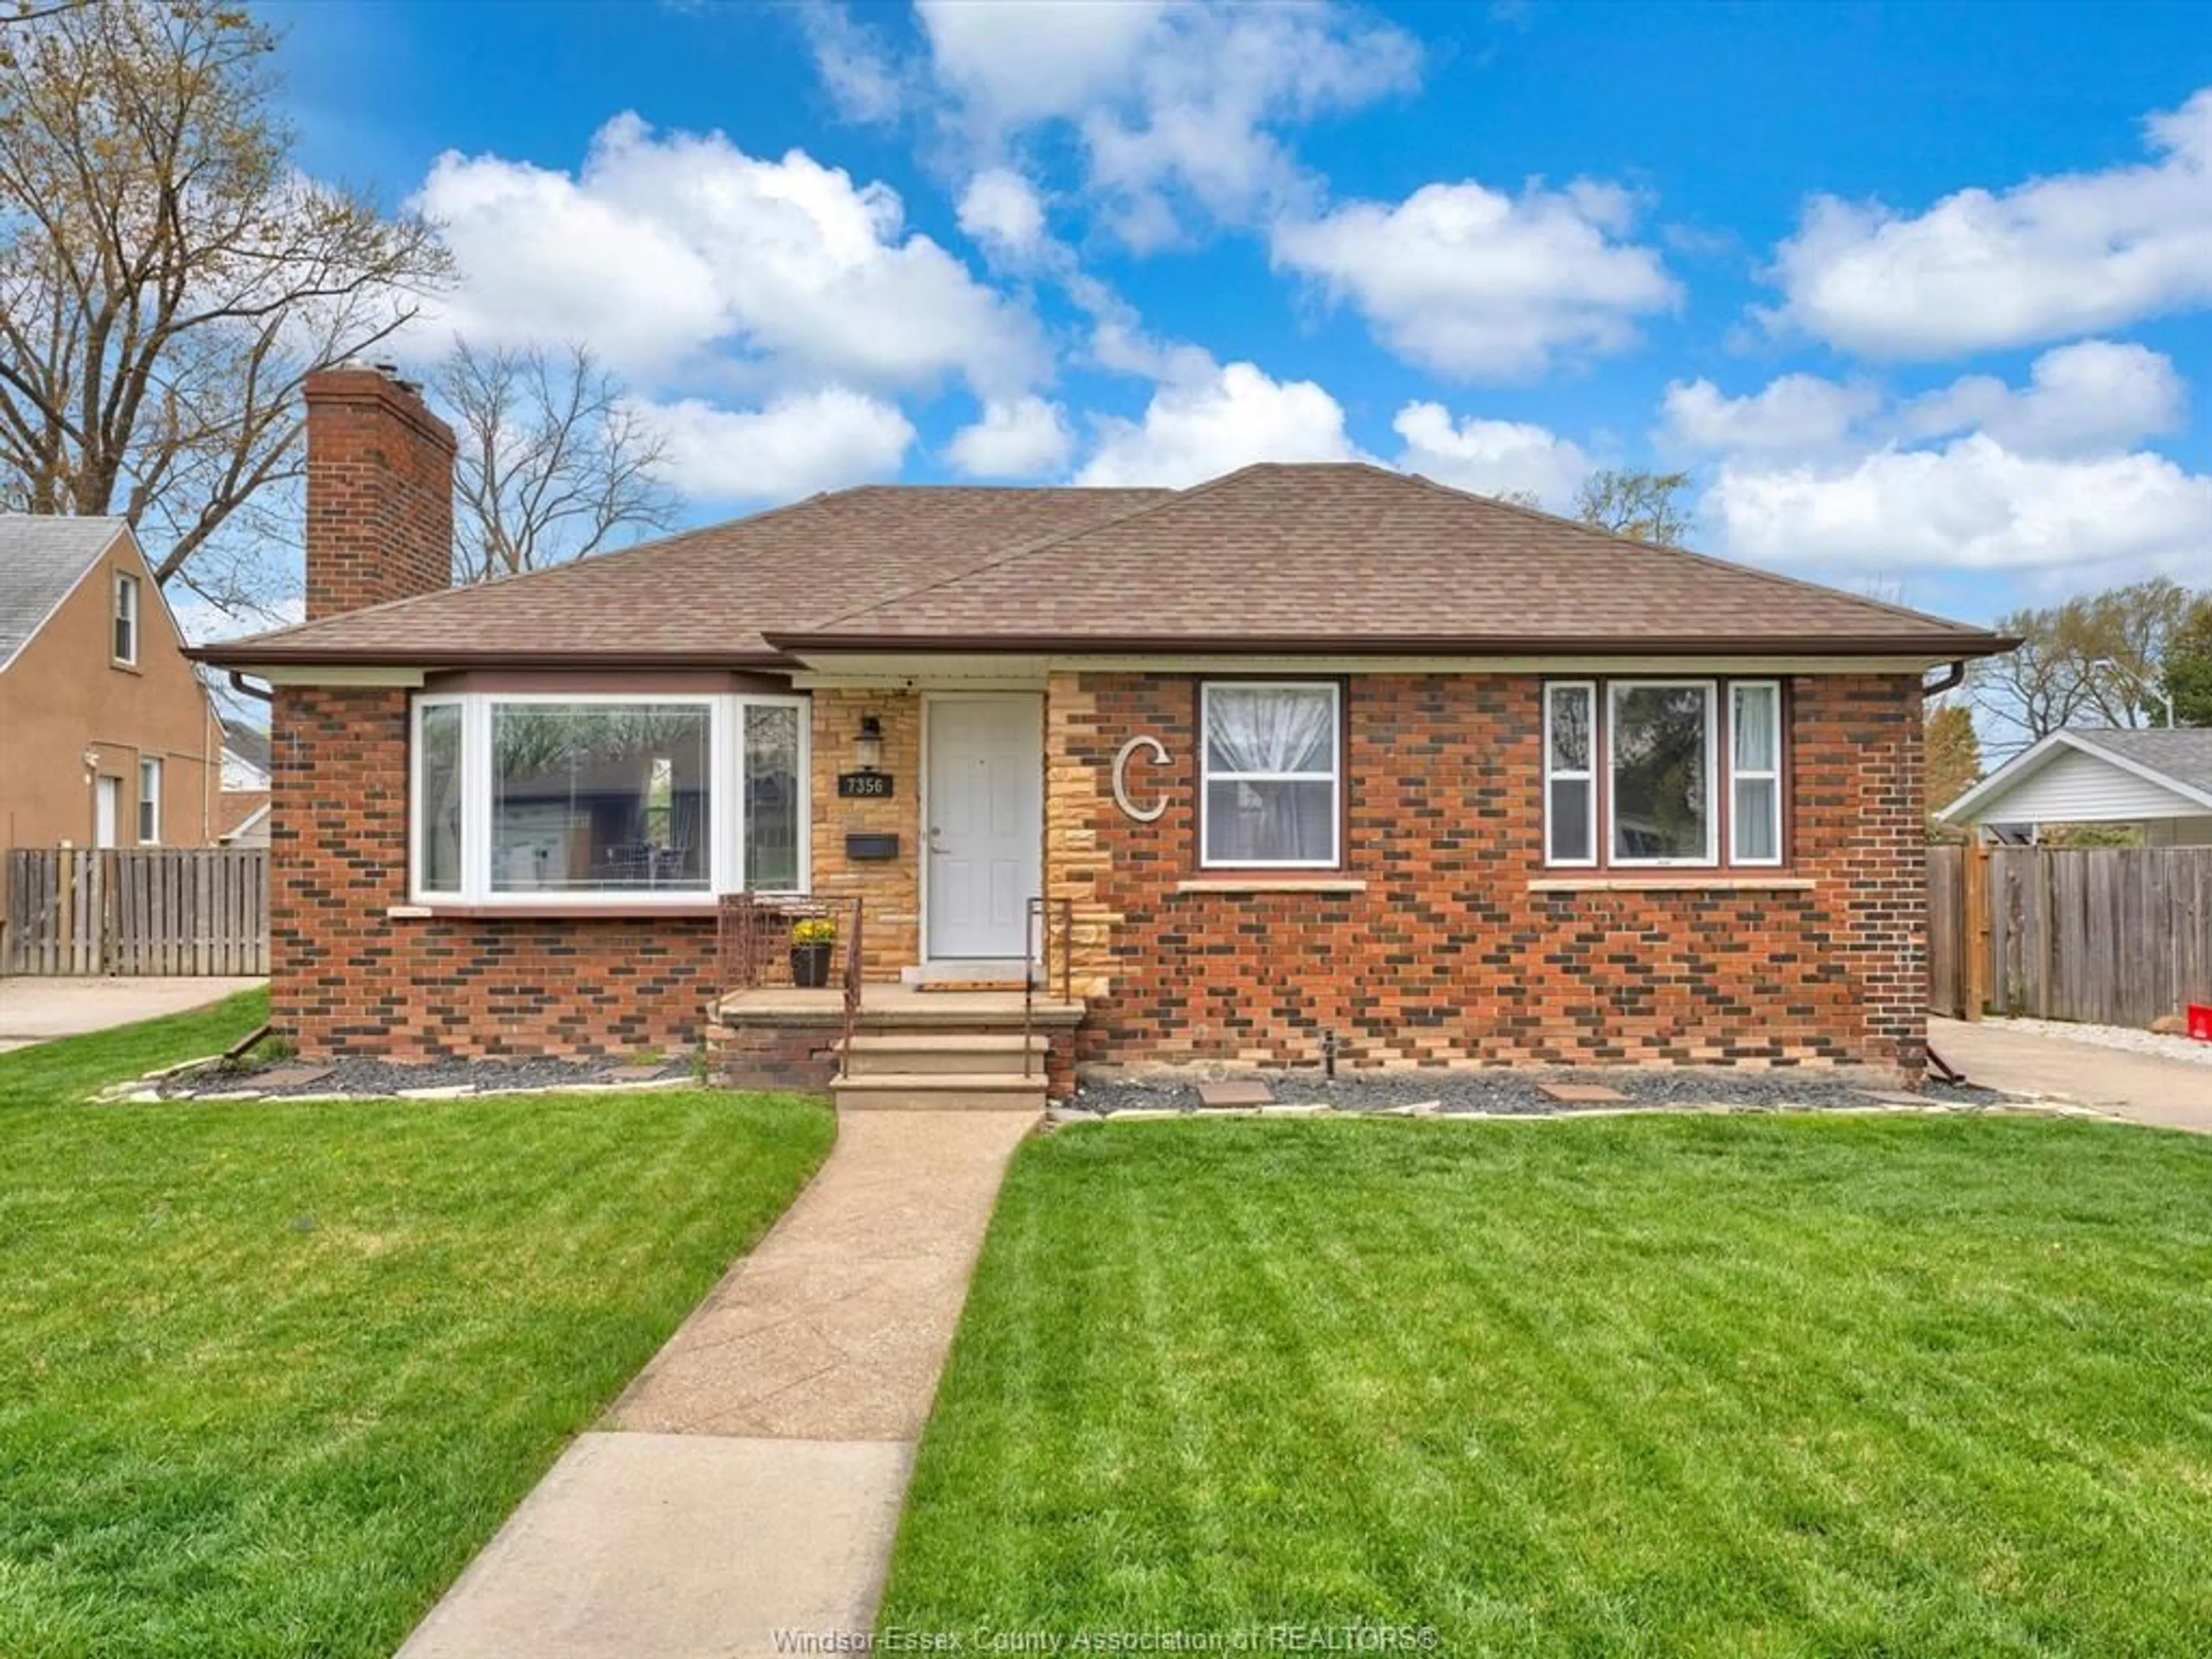 Home with brick exterior material for 7356 St. Rose Ave, Windsor Ontario N8S 1Y2